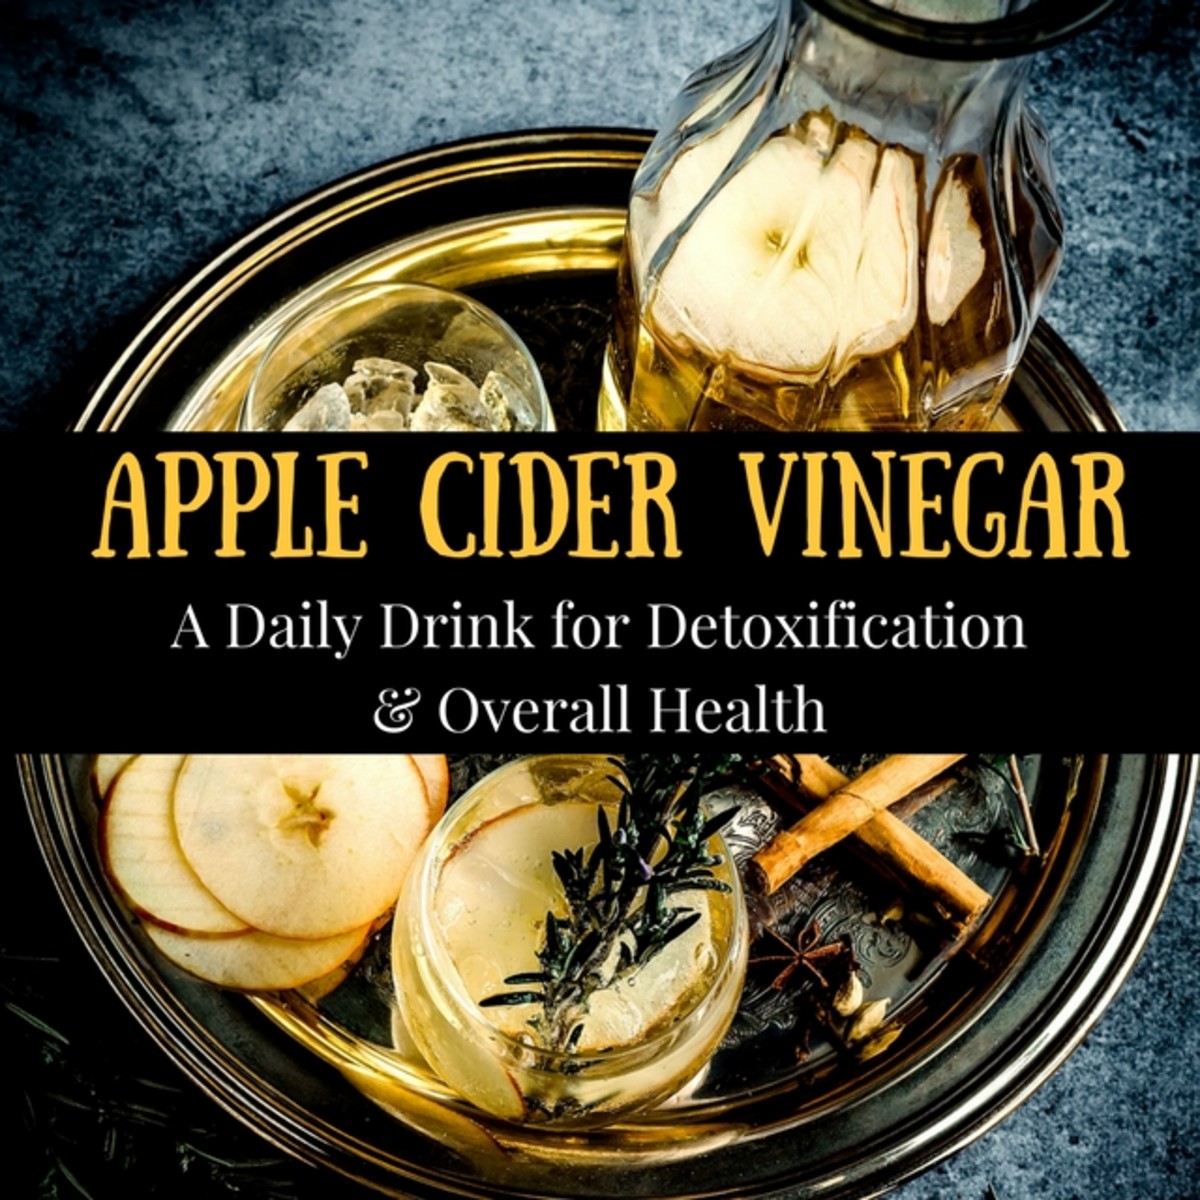 Apple Cider Vinegar: A Daily Drink for Detoxification and Overall Health